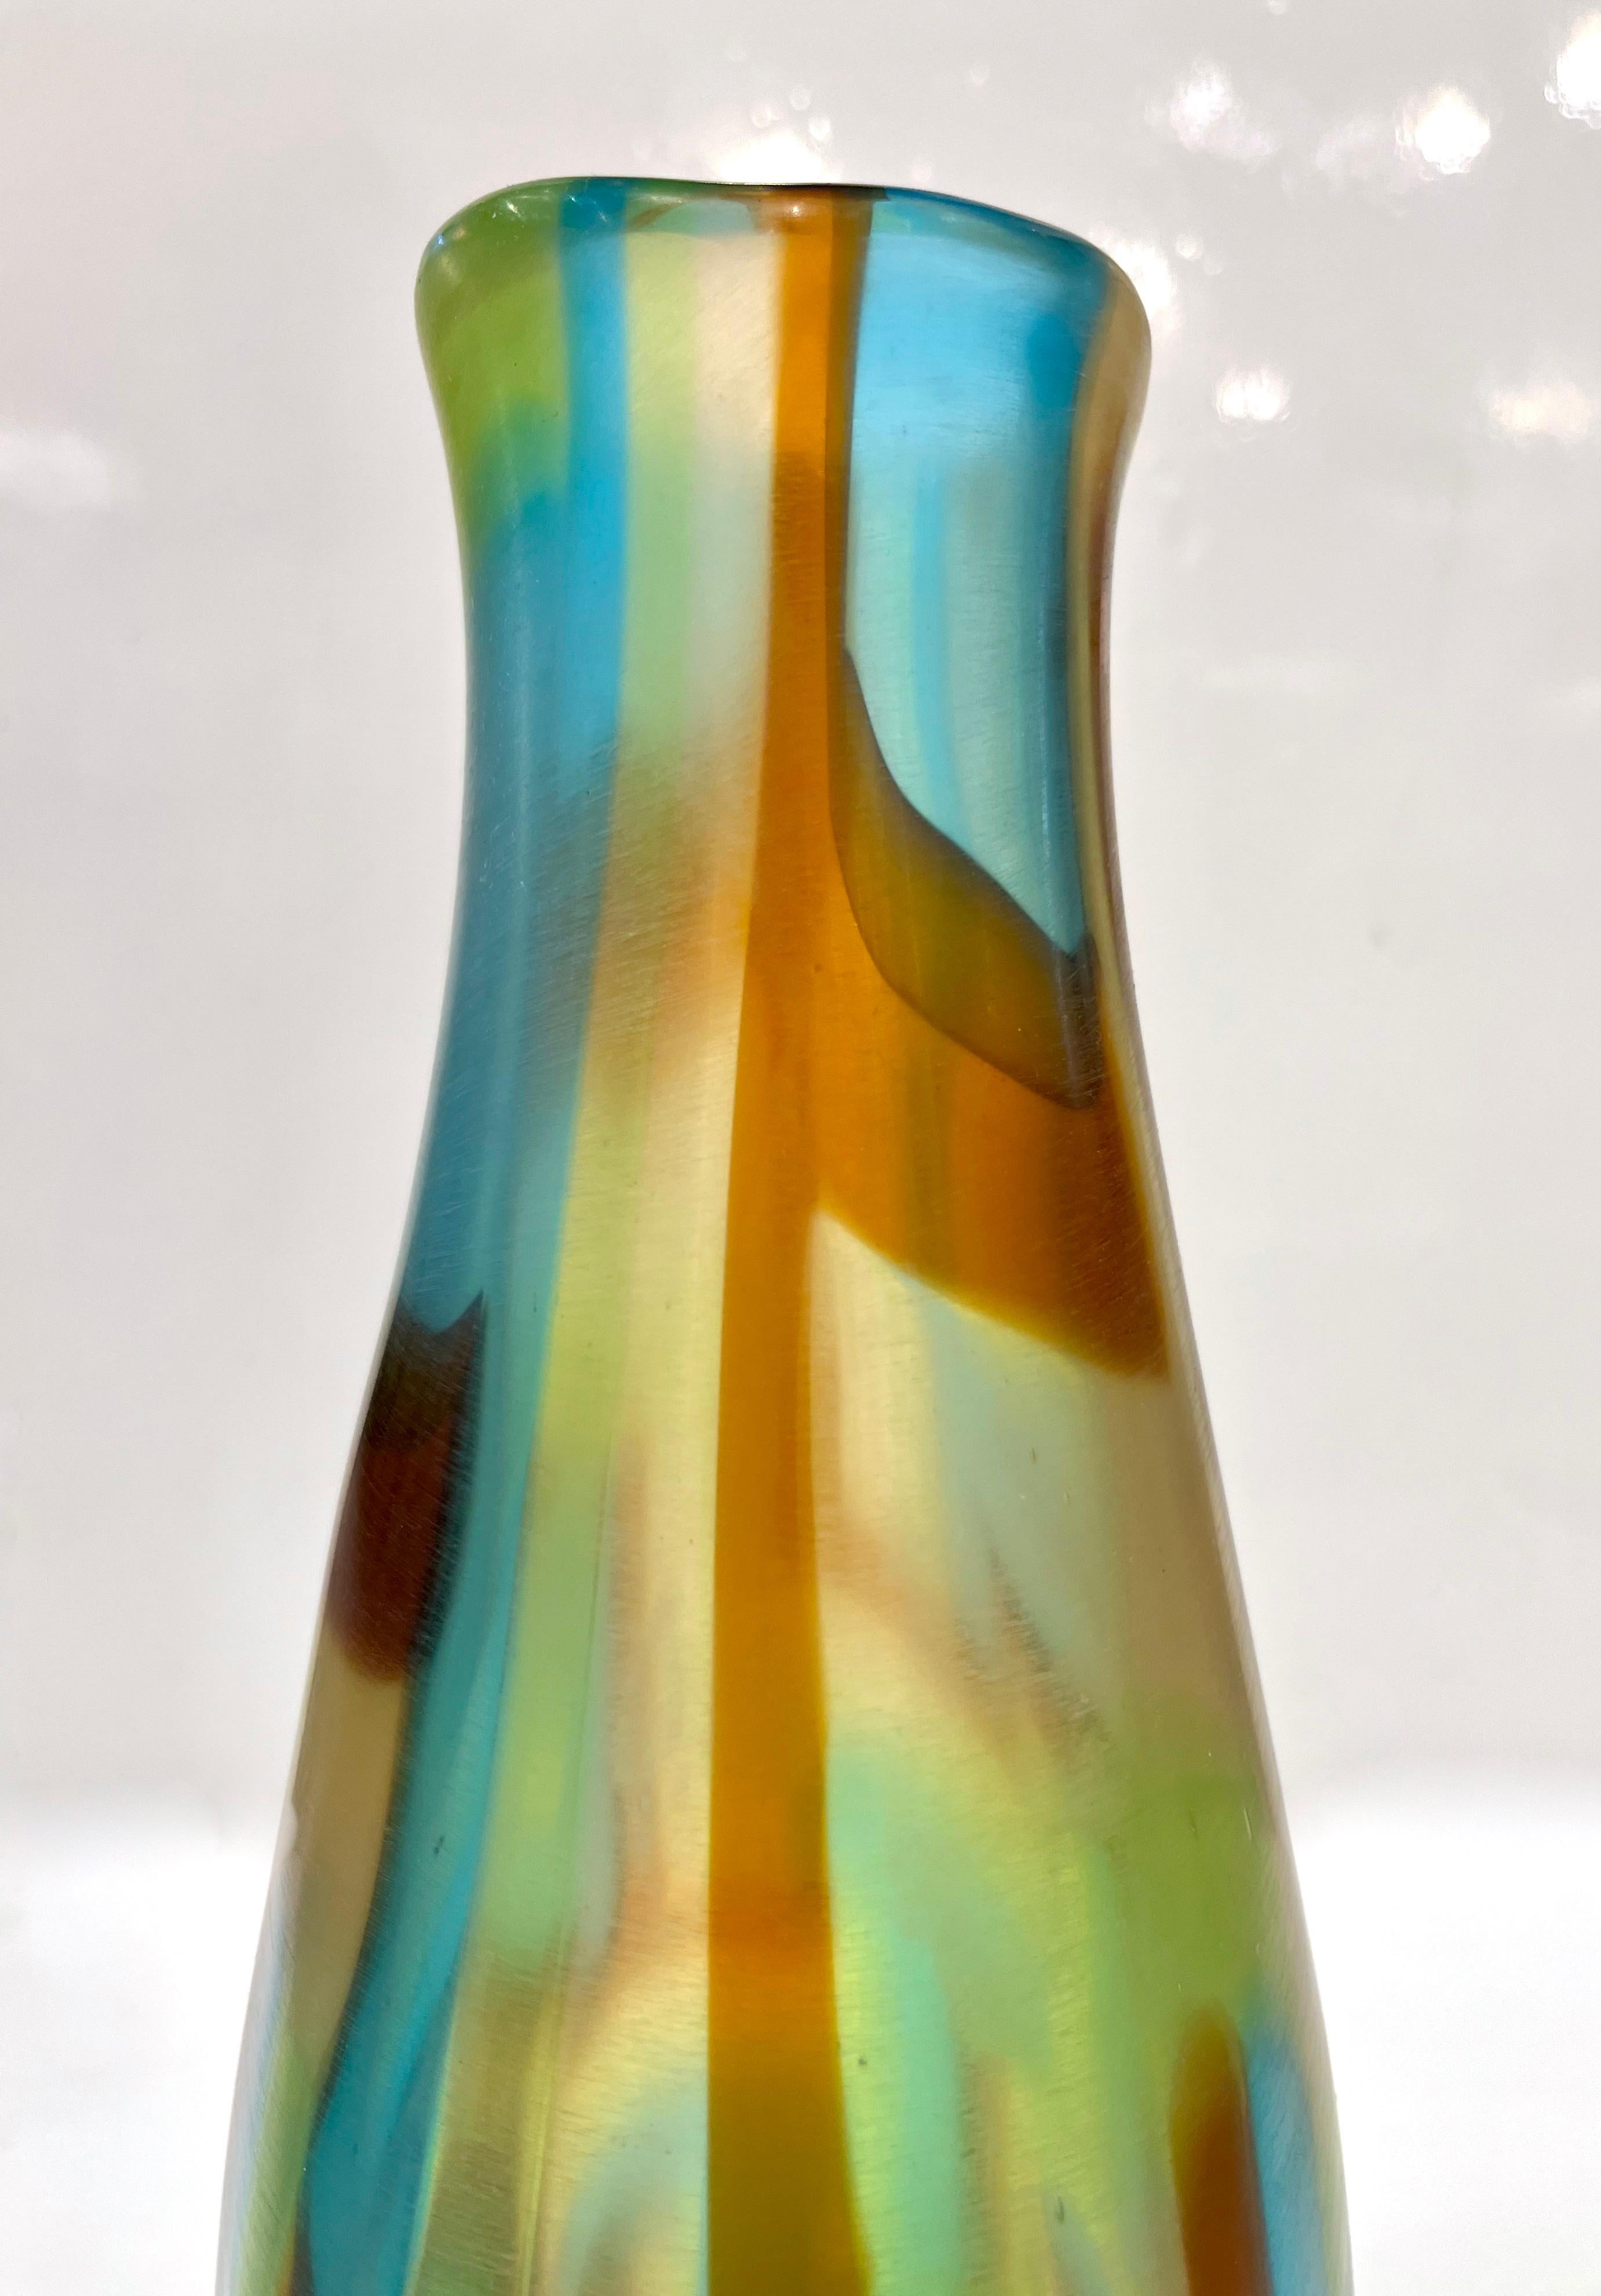 Afro Celotto Early 2000s Italian Turquoise Yellow Green Amber Murano Glass Vase For Sale 6